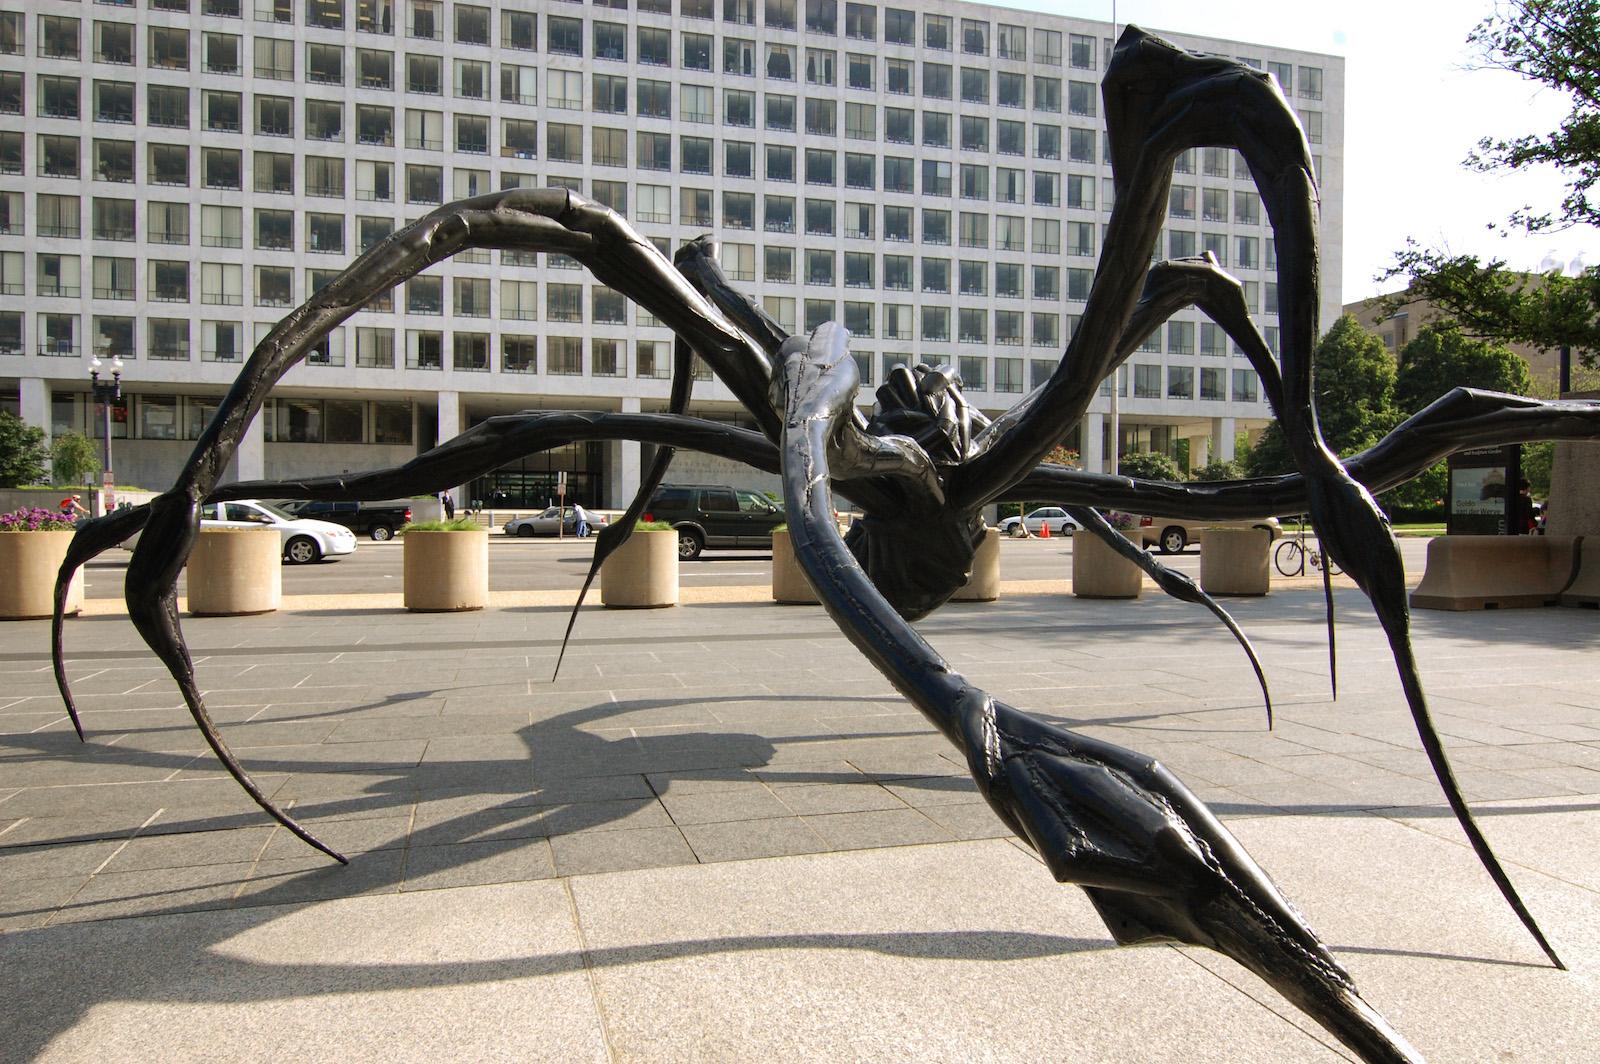 Louise Bourgeois, Crouching Spider, 2003. Bronze, black and polished patina, and stainless steel. 106 1/2 x 329 x 247 in. (270.5 x 835.6 x 627.3 cm).